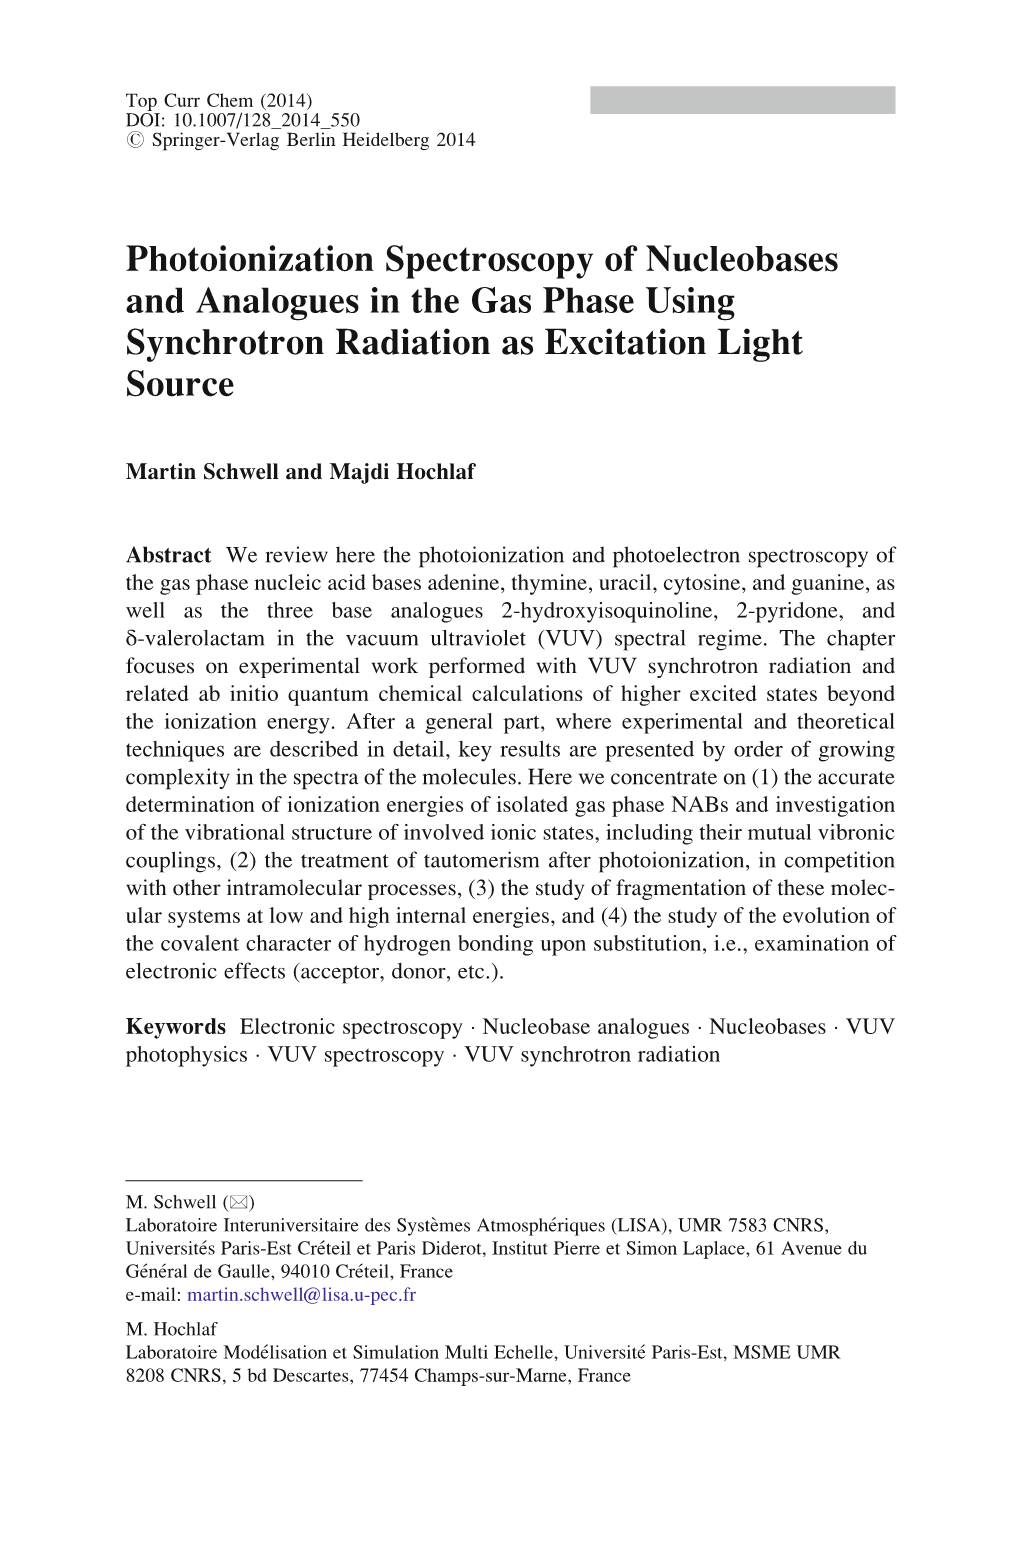 Photoionization Spectroscopy of Nucleobases and Analogues in the Gas Phase Using Synchrotron Radiation As Excitation Light Source